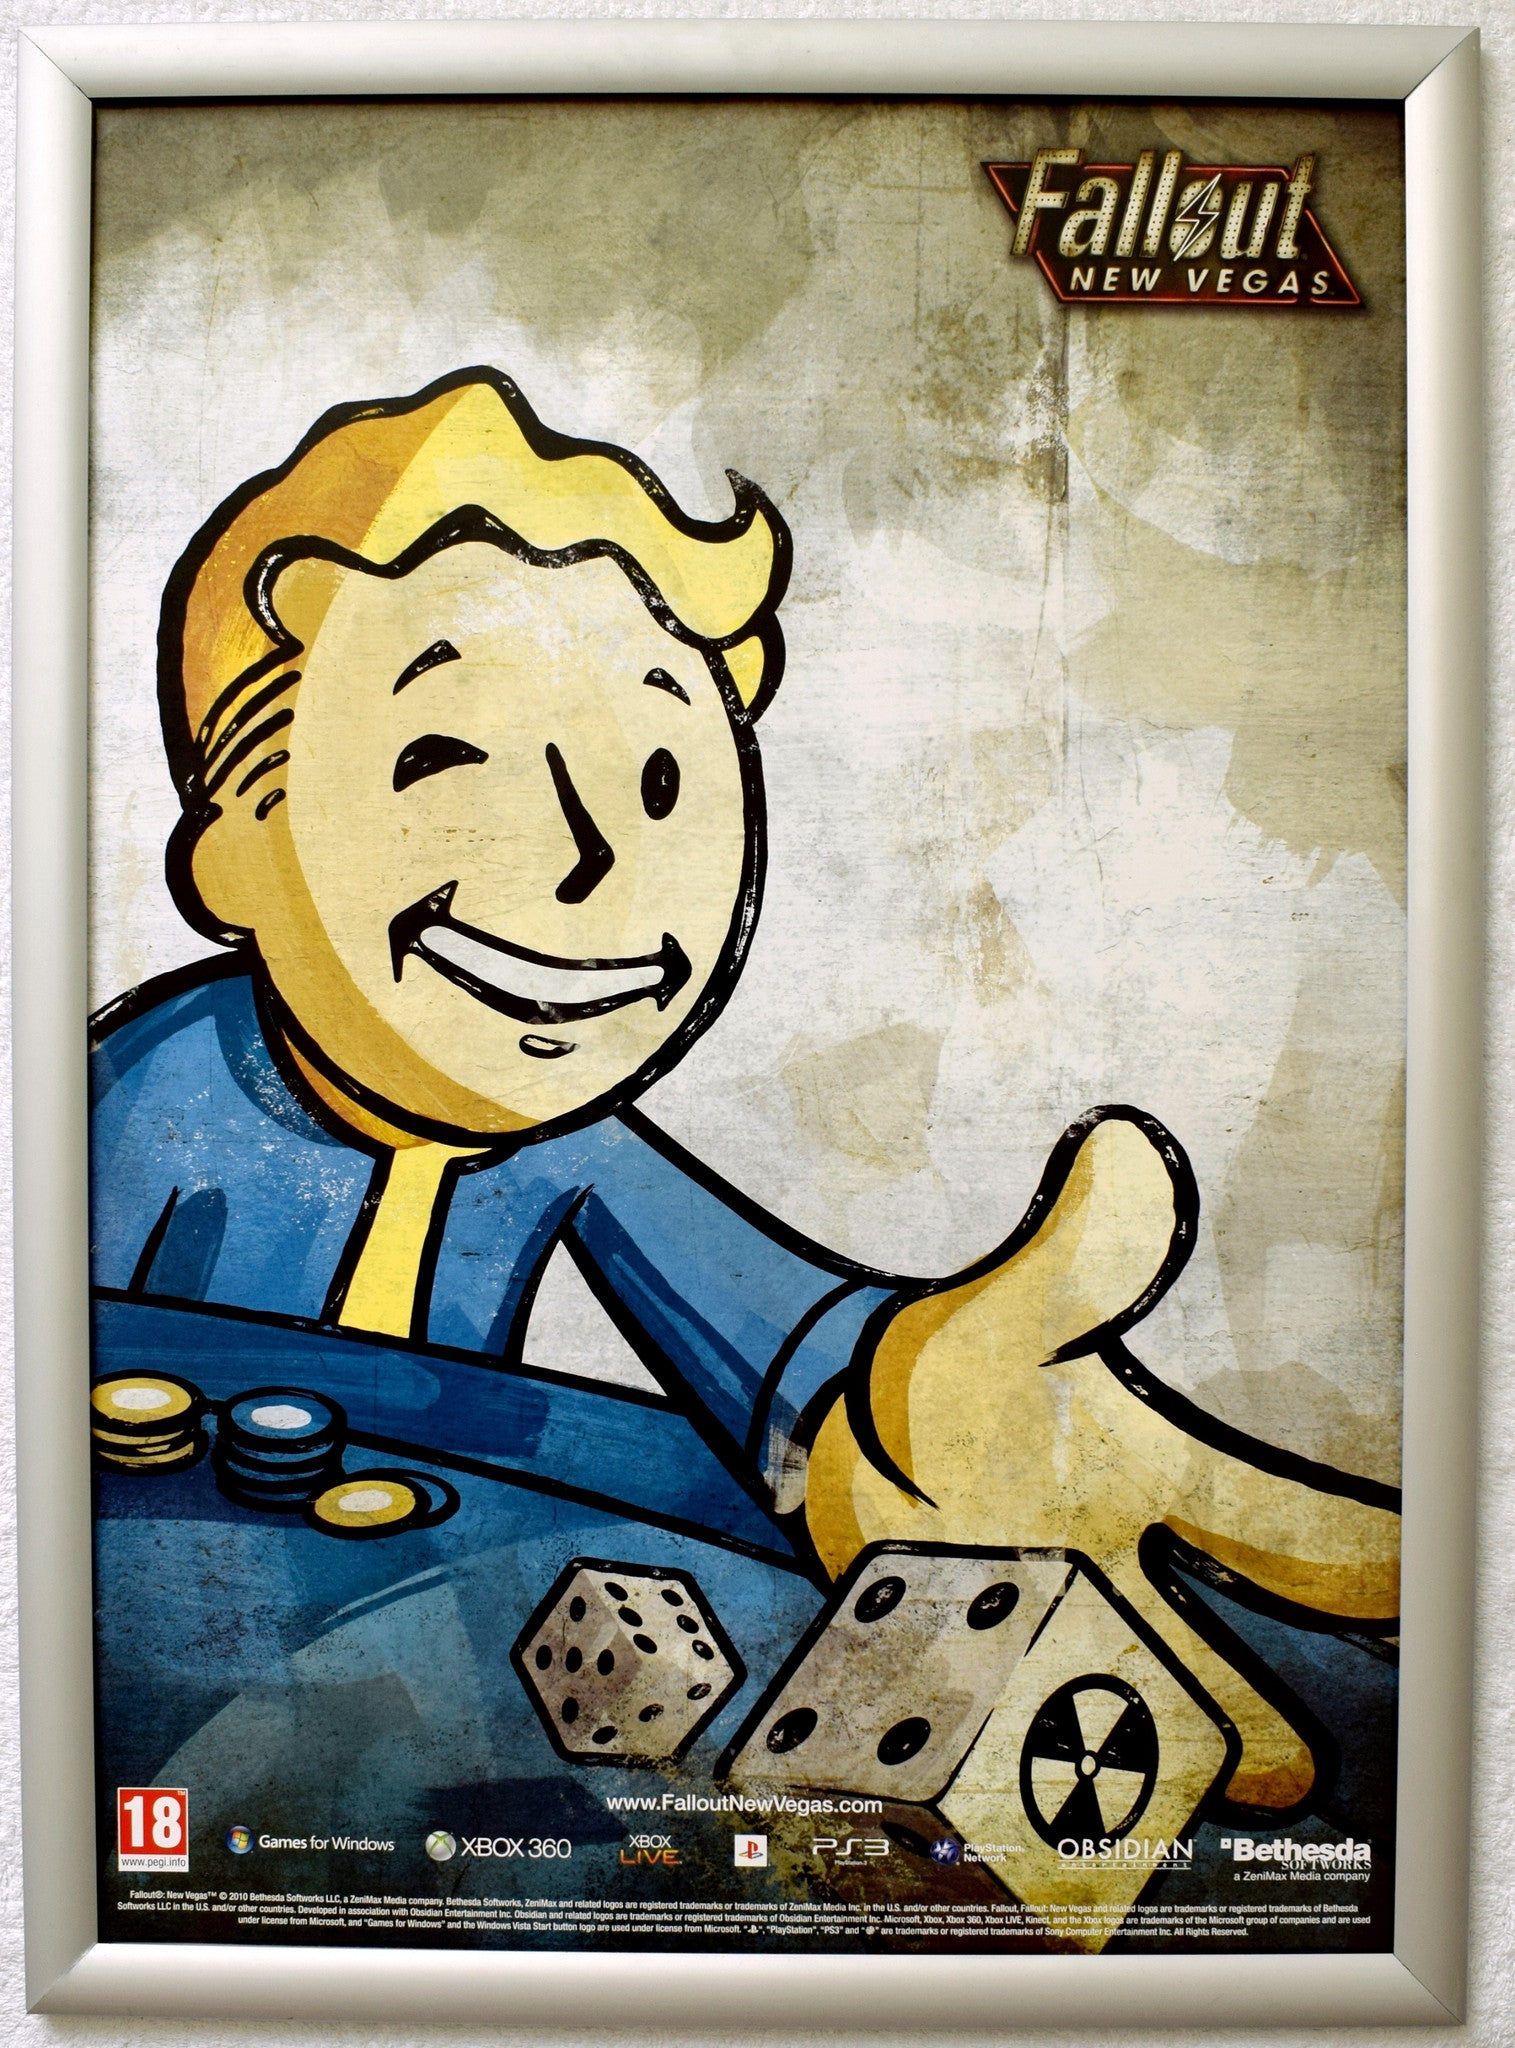 Fallout New Vegas (A2) Promotional Poster #1